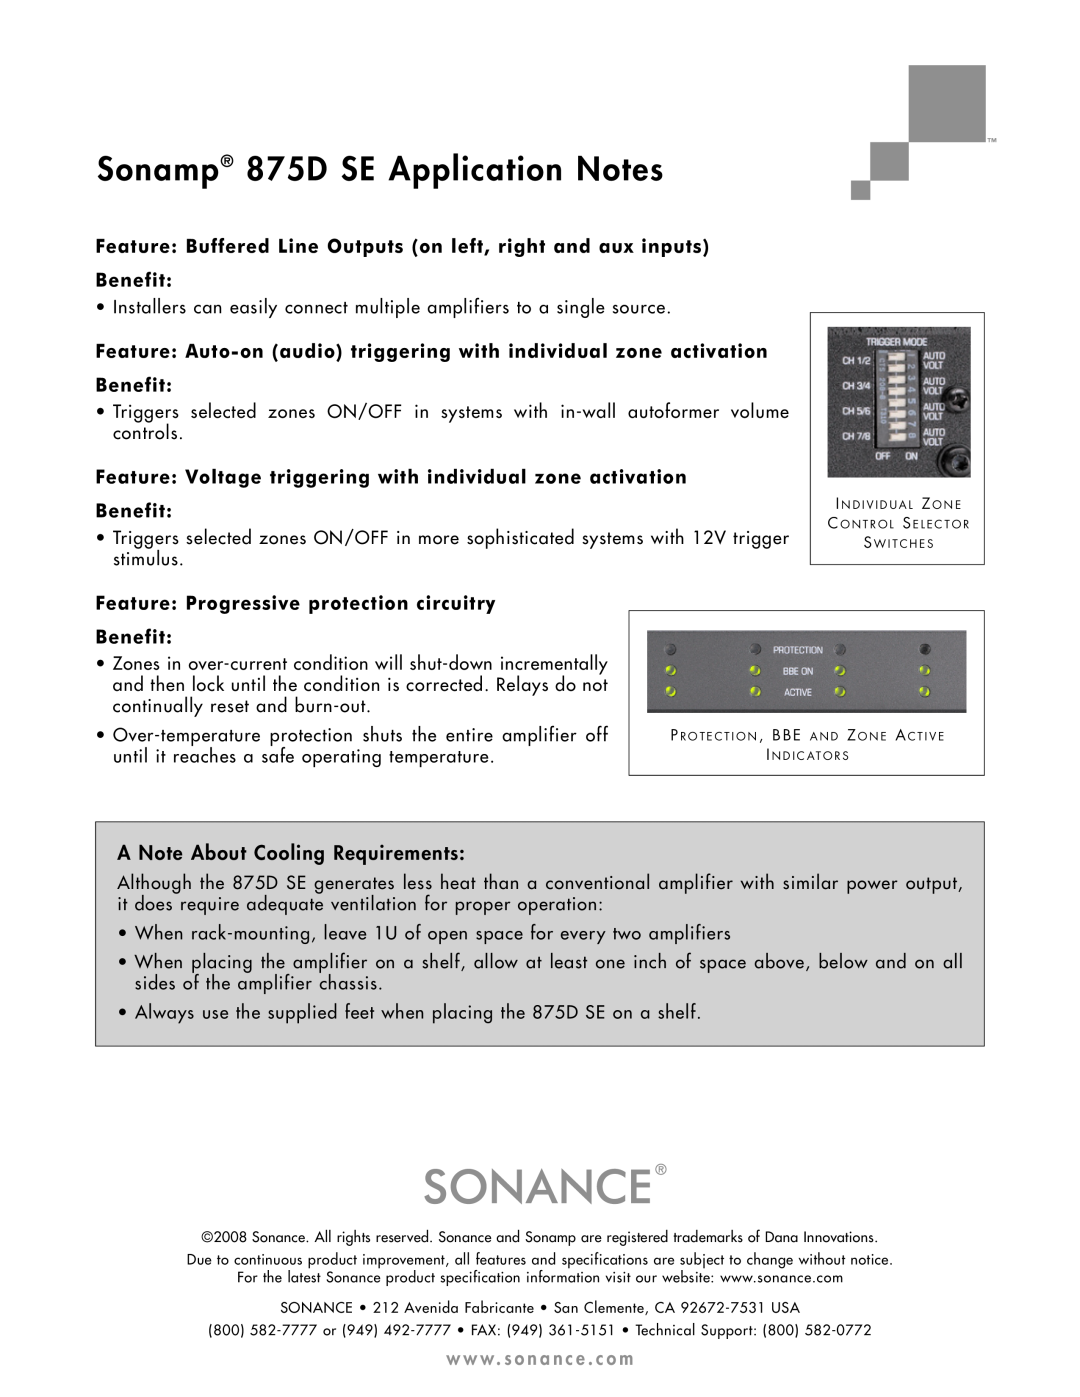 Sonance manual Sonamp 875D SE Application Notes, Feature Progressive protection circuitry Benefit 